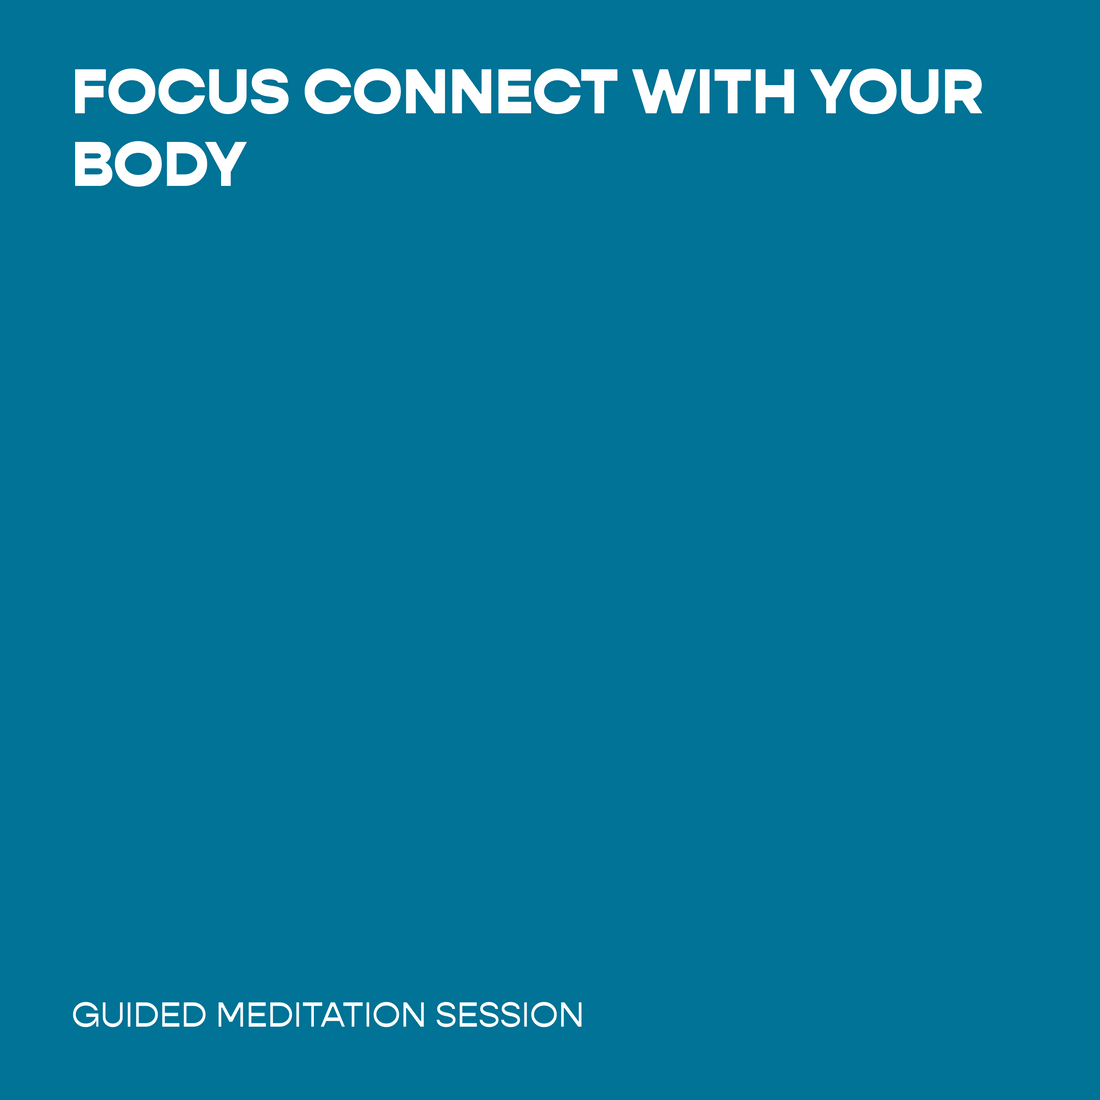 Focus Connect with Your Body